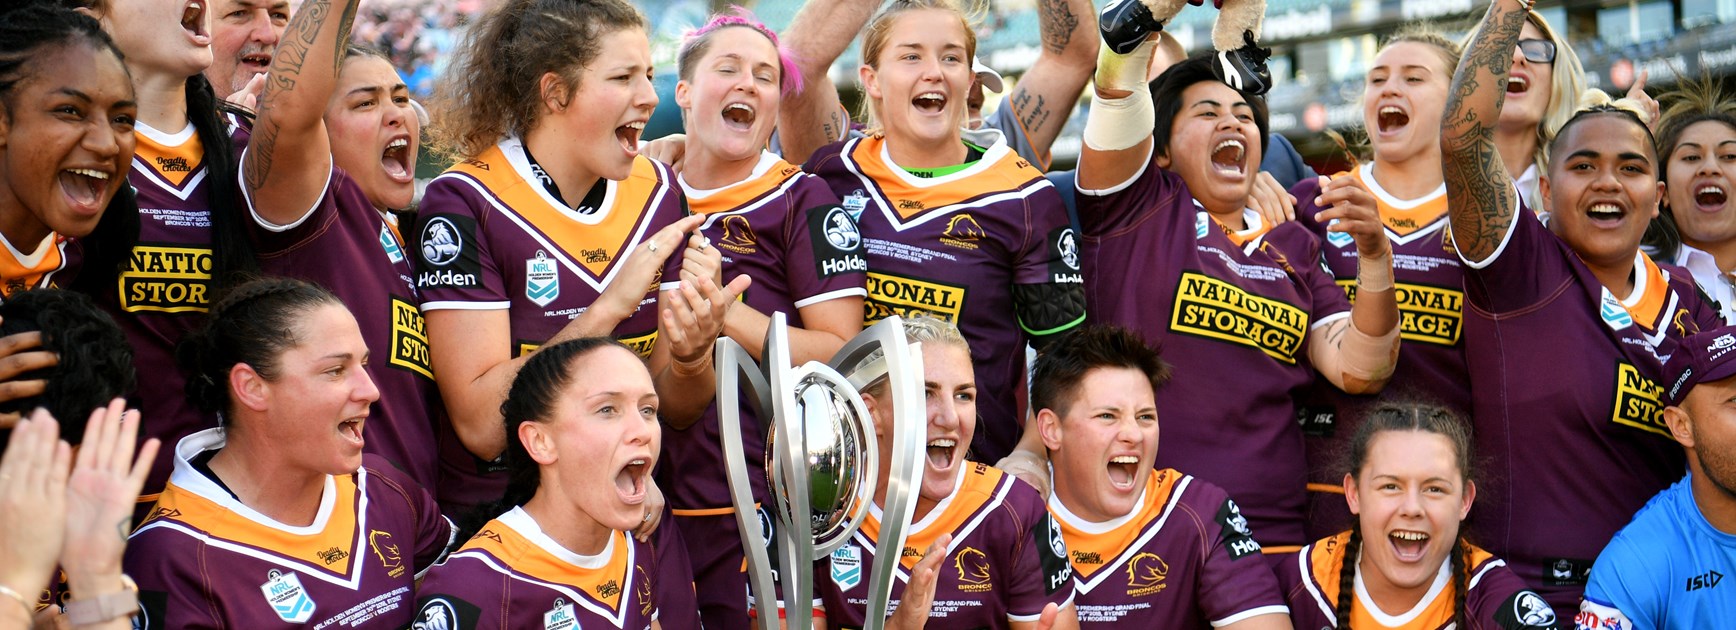 2019 NRLW signings: Squads confirmed for second season